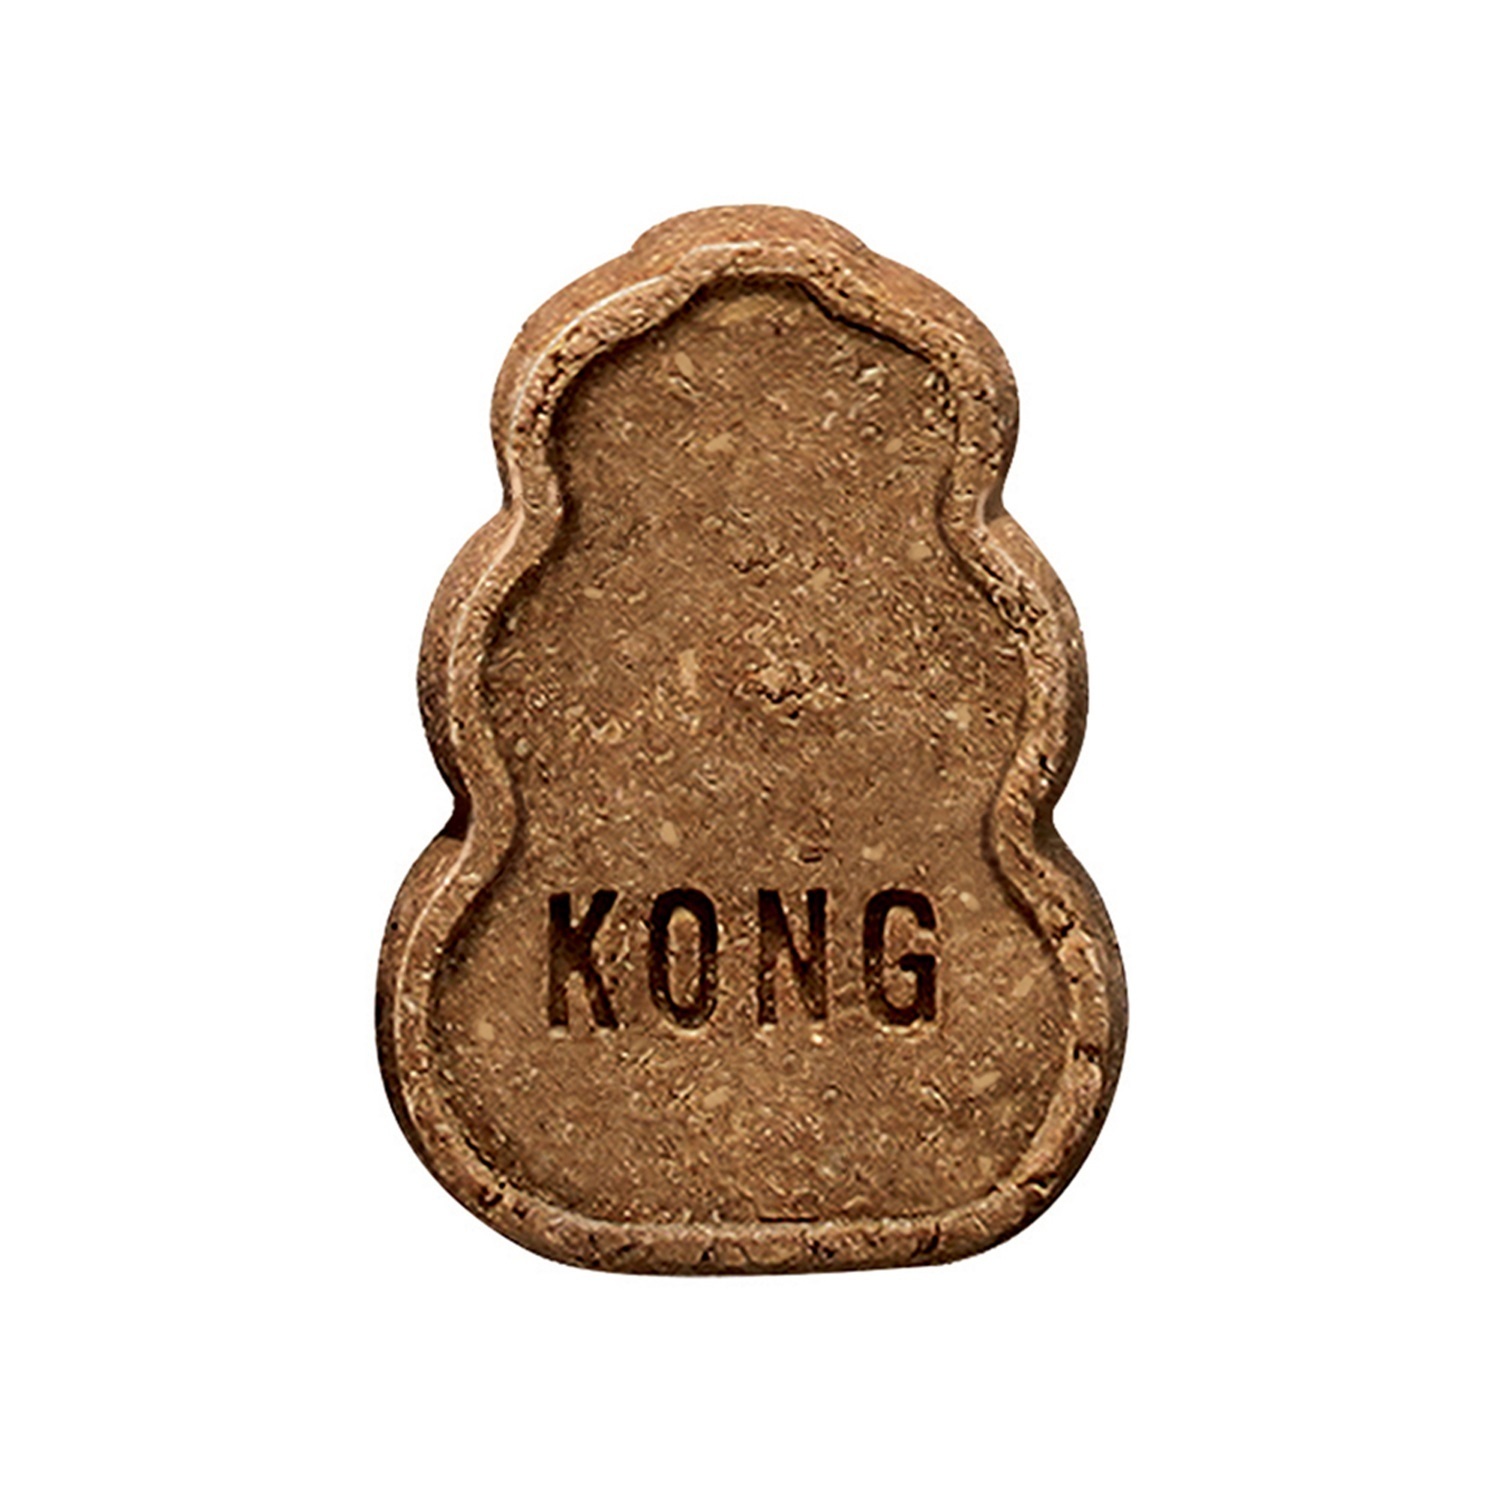 KONG Stuff'n Liver Biscuit Snacks for Small Dogs 200g image 0